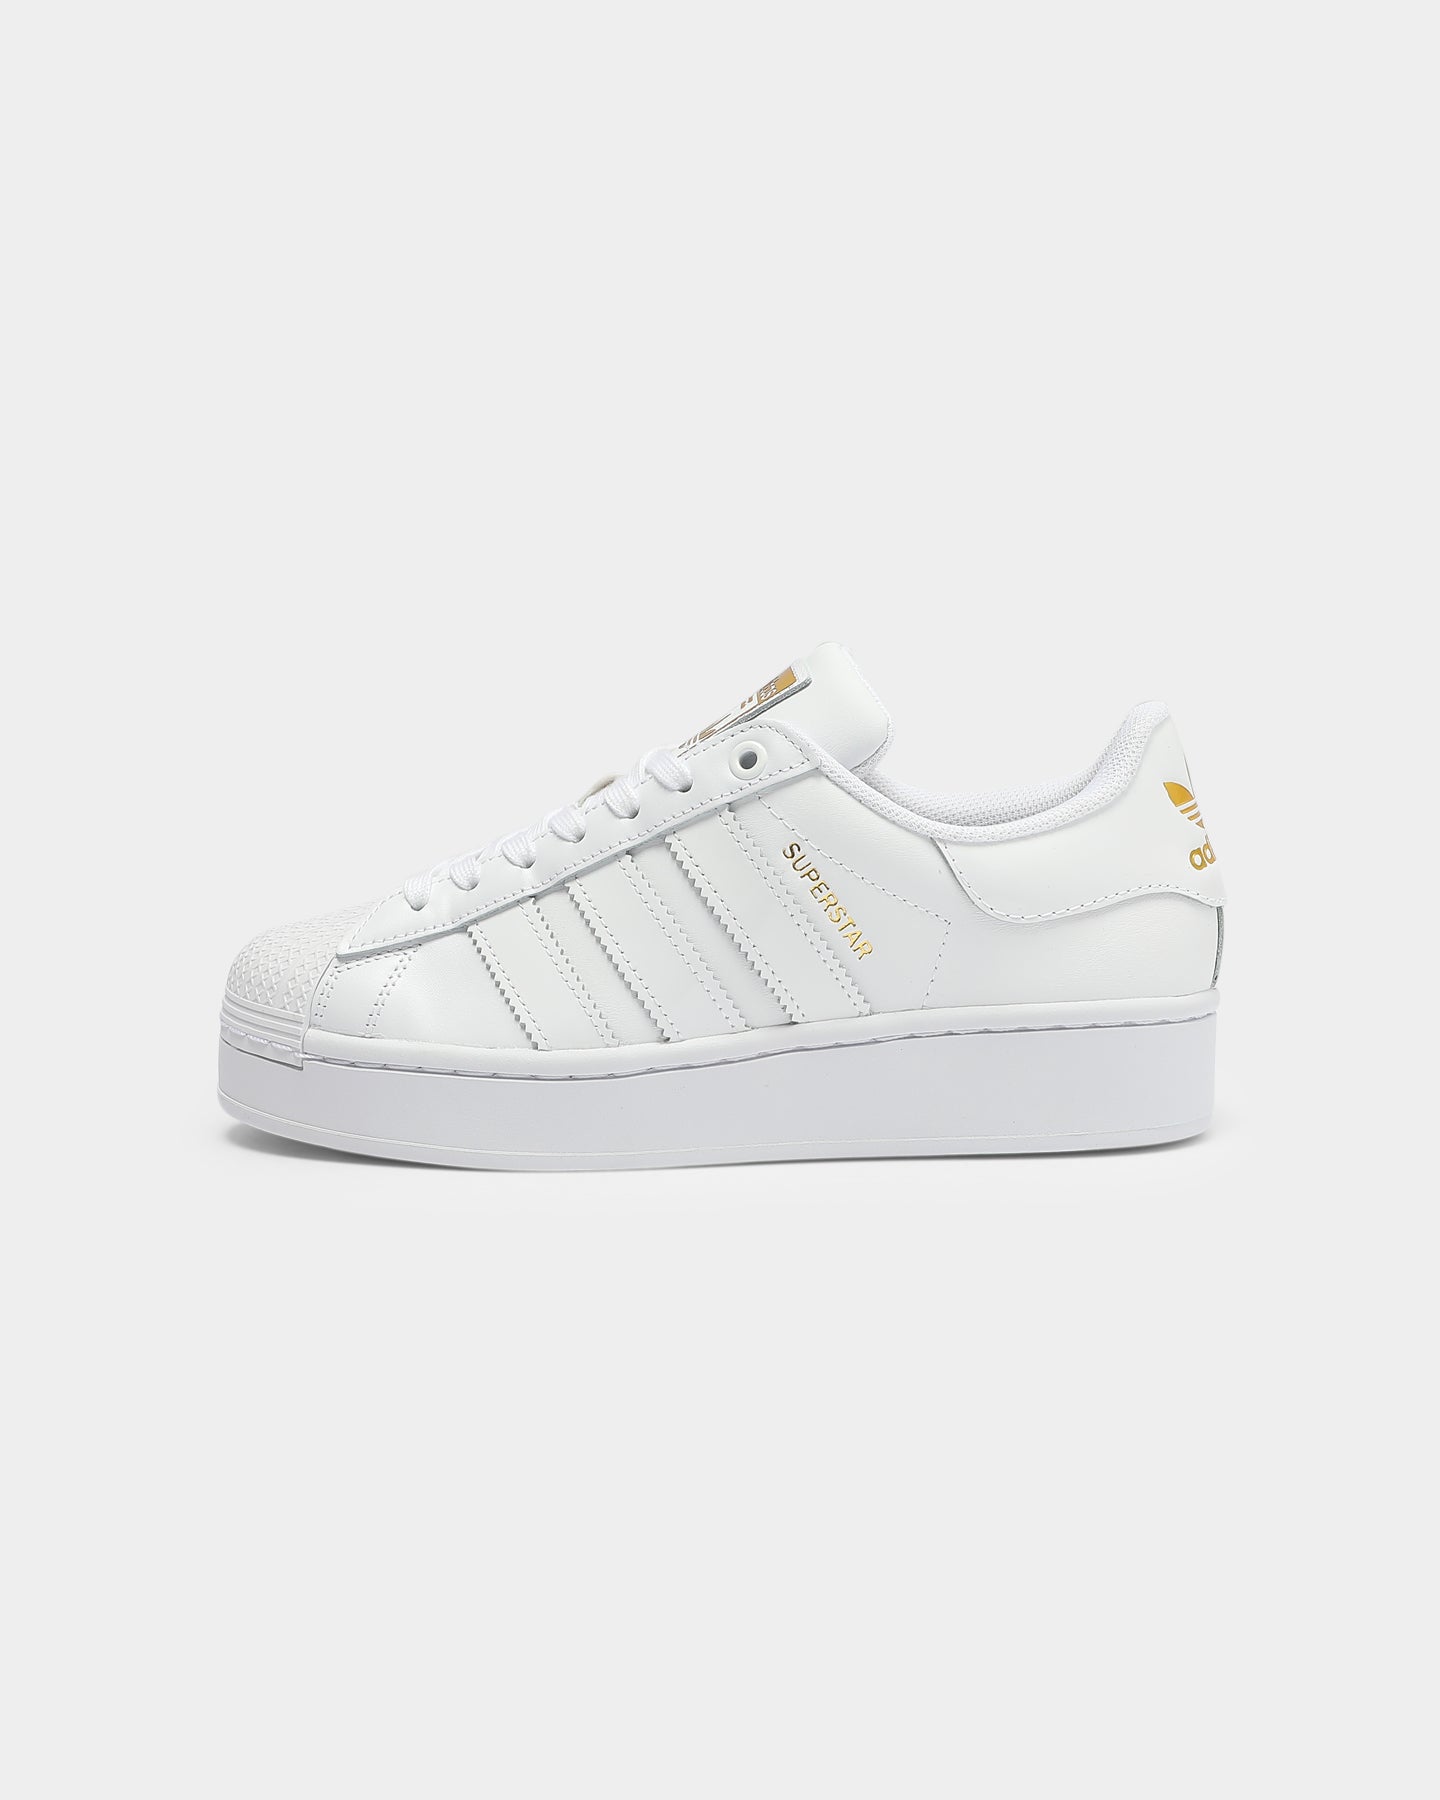 adidas white and gold women's sneakers